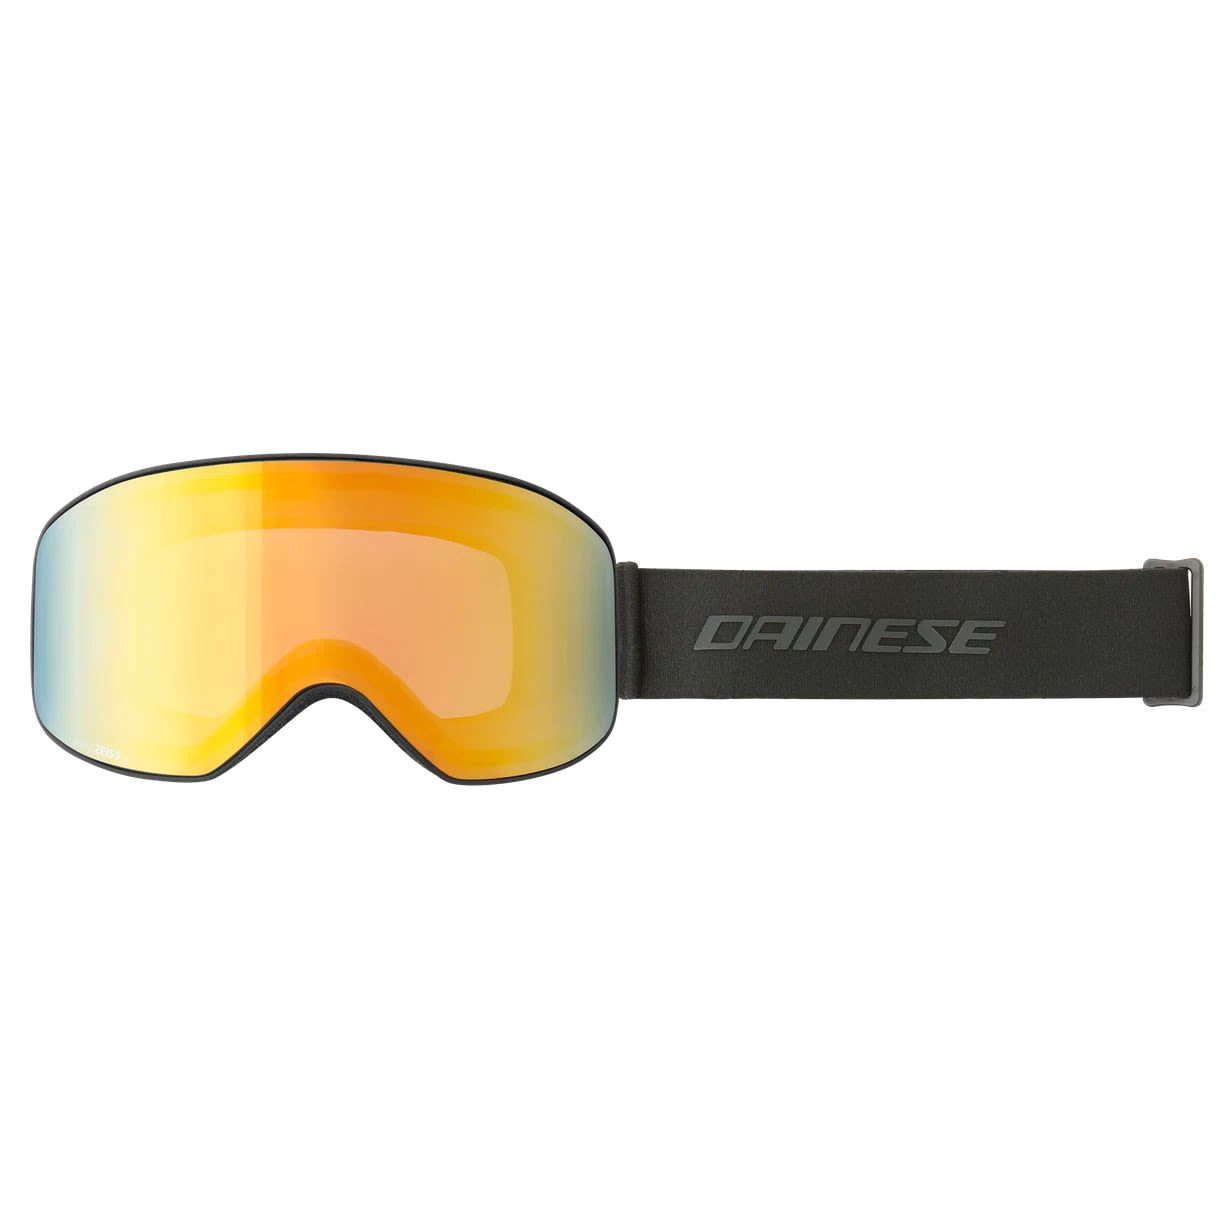 Dainese Skibrille Limo Horizon Stretch Dainese Hp Accessoires